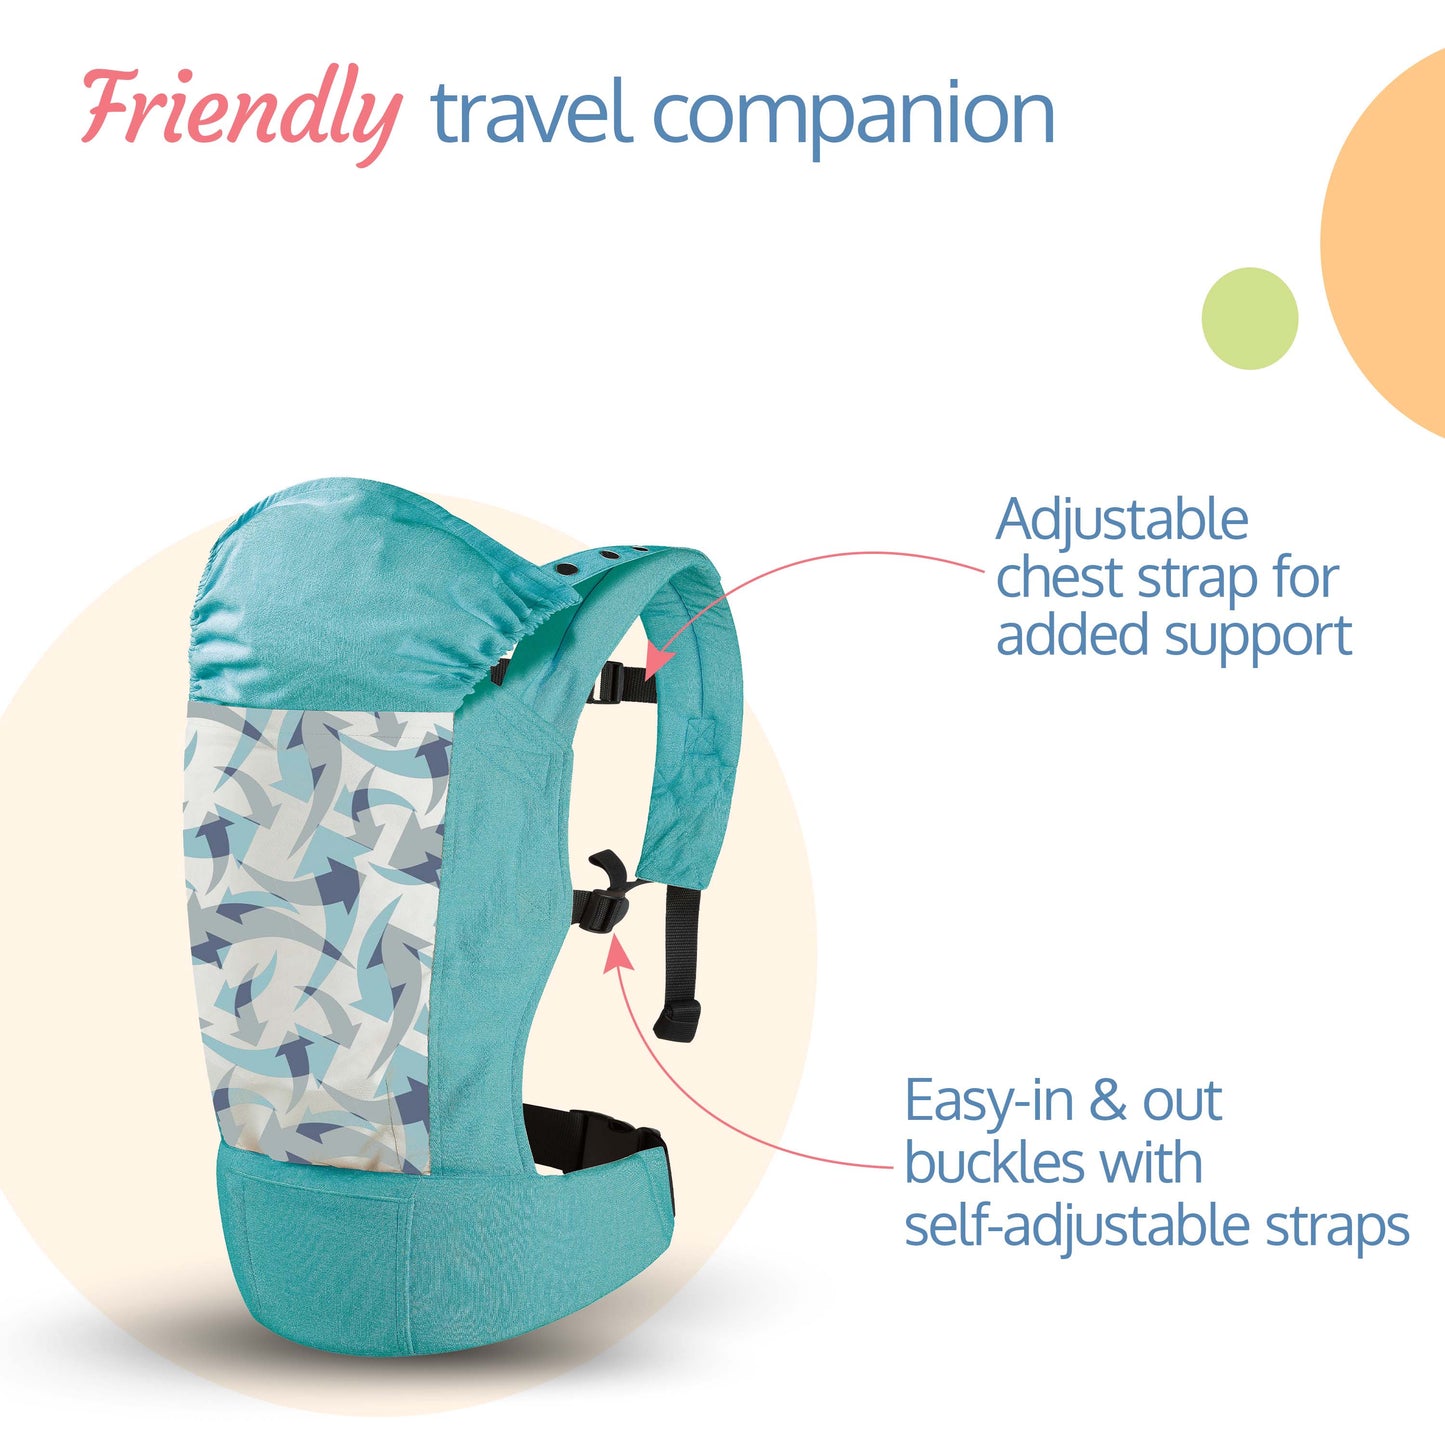 Adore Baby Carrier with 2 Carry Positions, Carrier for 4 to 24 Months Baby, Breathable Skin Friendly Premium Fabric, Adjustable Newborn to Toddler Carrier, Max Weight Upto 18 Kgs (Light Blue)